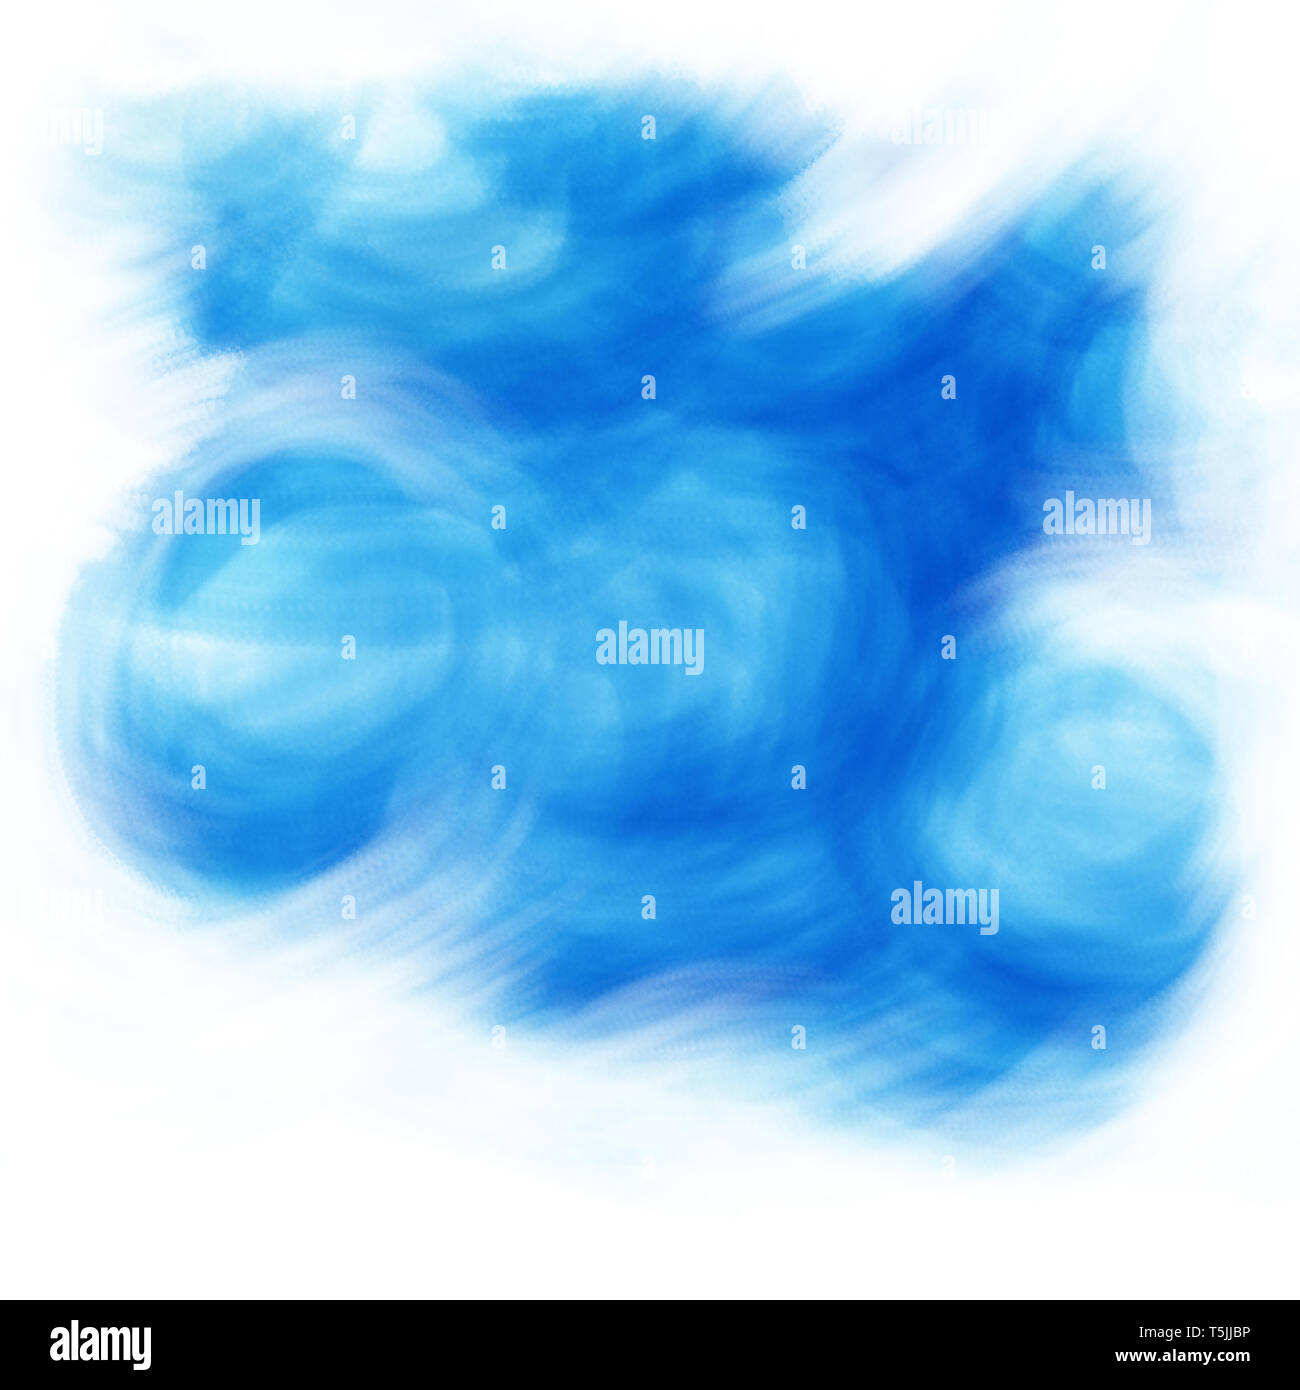 Blue colour background. Illustration of clouds, wind and sky painted by hand. Stock Photo